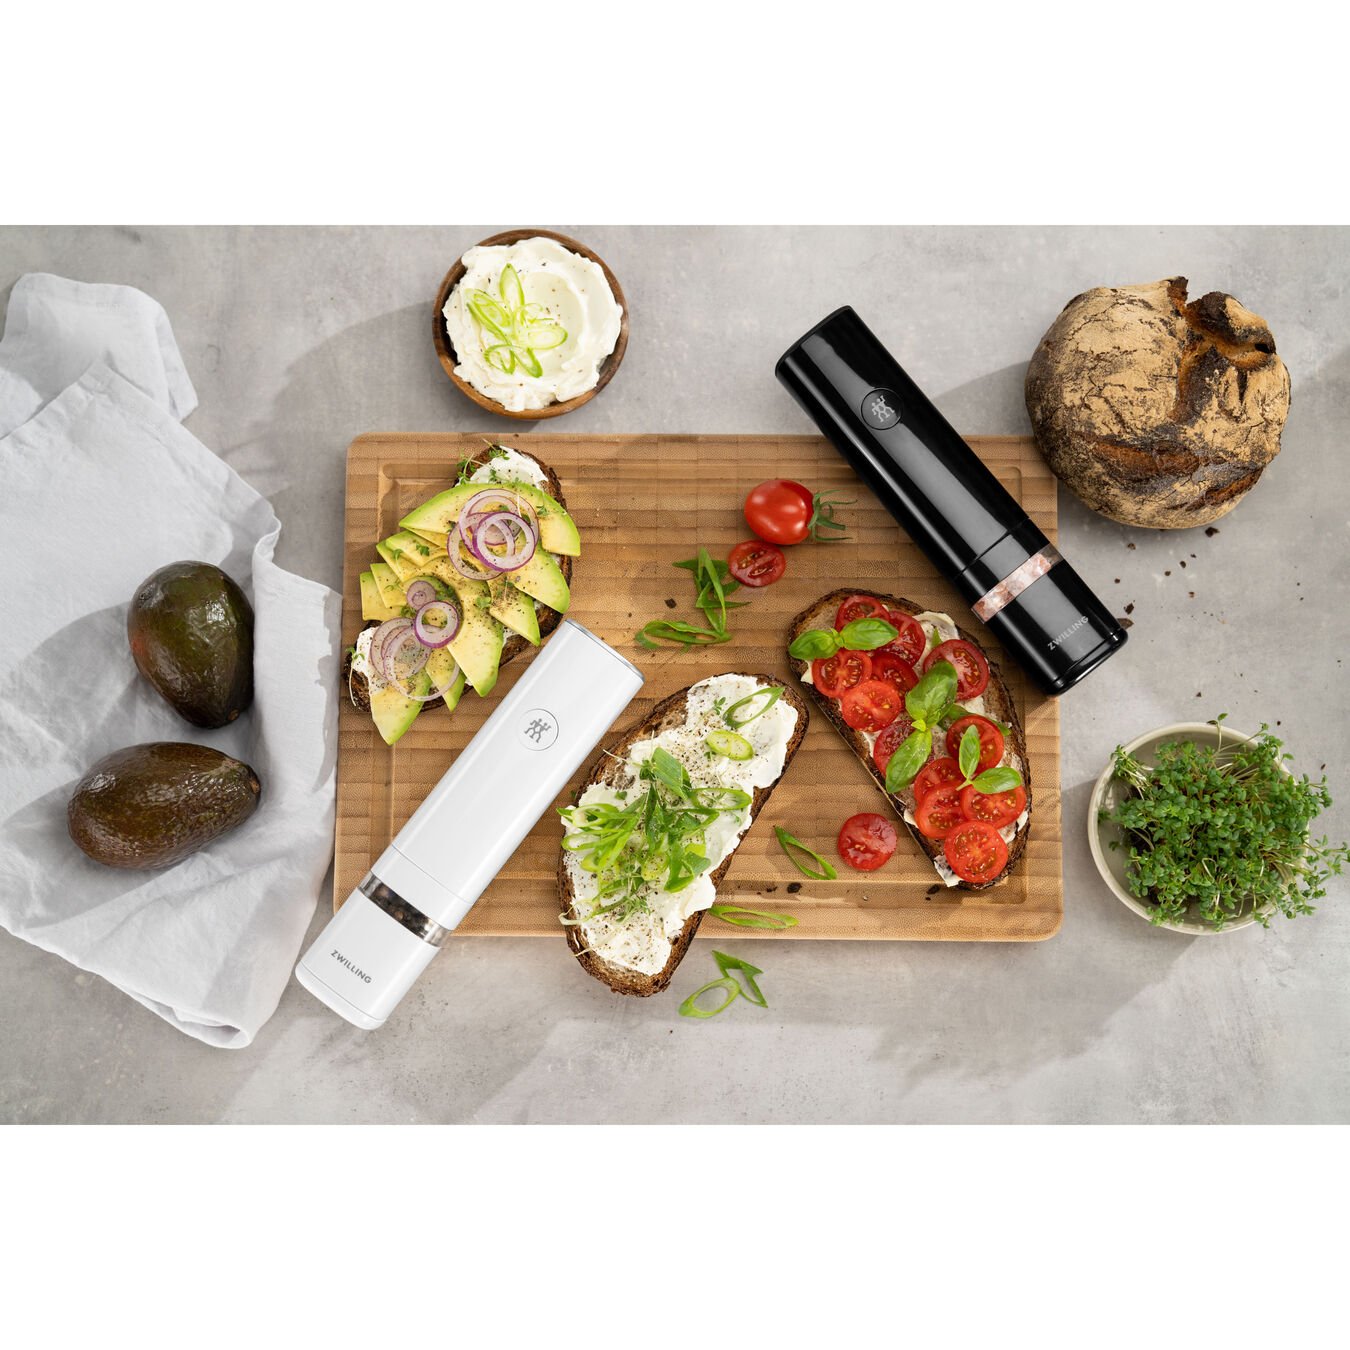 both electric salt and pepper mill displayed on a cutting board next to avocados, toast with cheese and veggies, next to a bowl of seasonings, and a white towel on a light gray surface